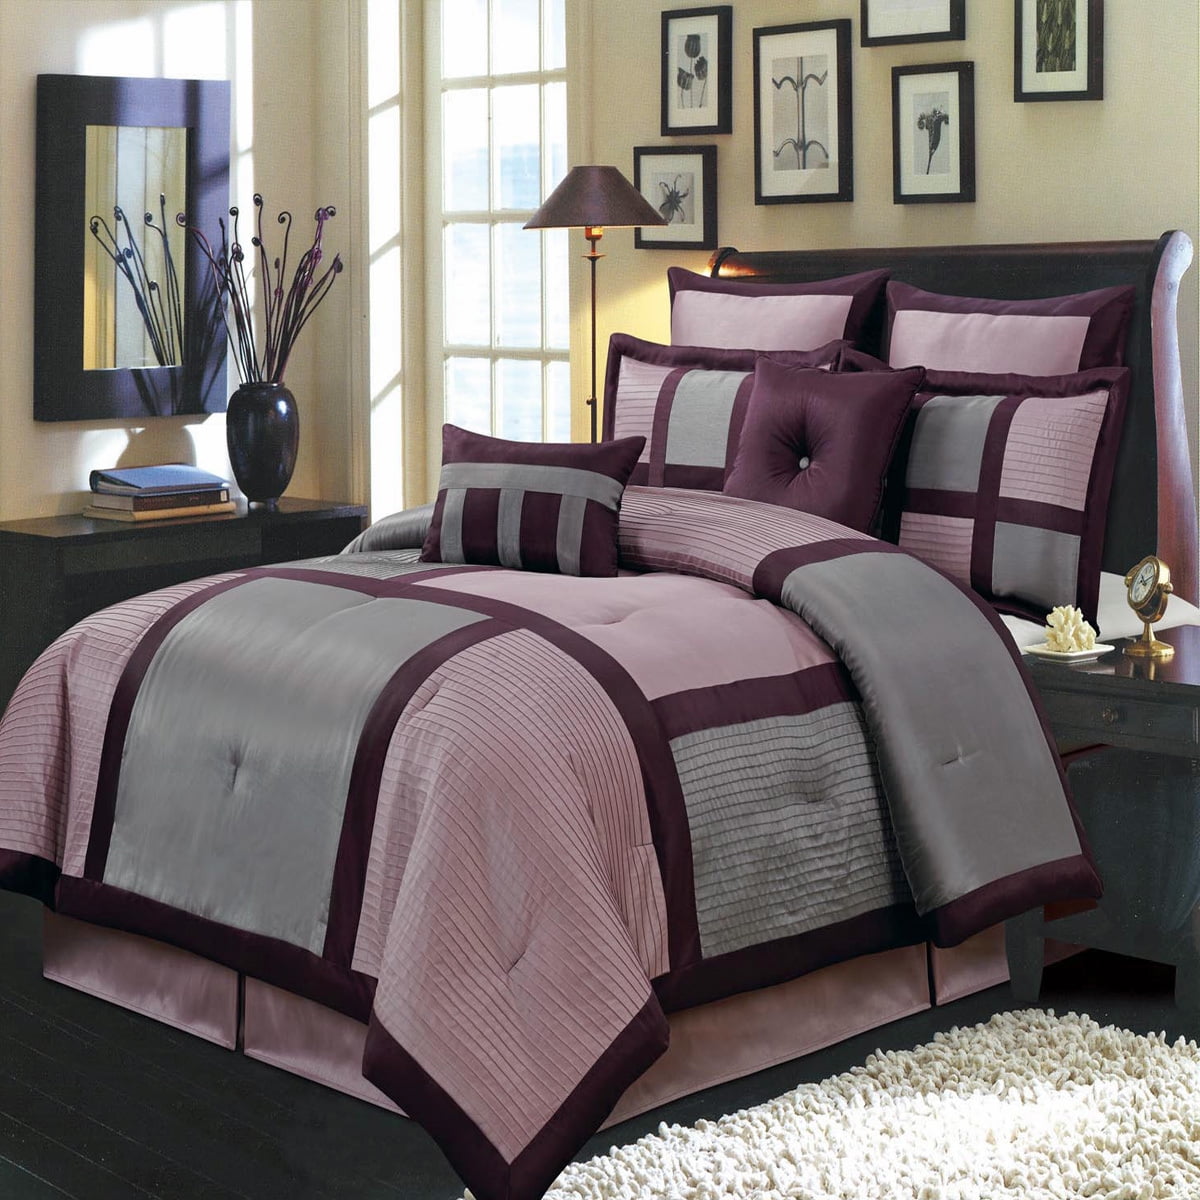 Morgan Purple 6-PC Bedding Set, Includes Comforter, Bed Skirt, Shams and Pillows - Twin-XL